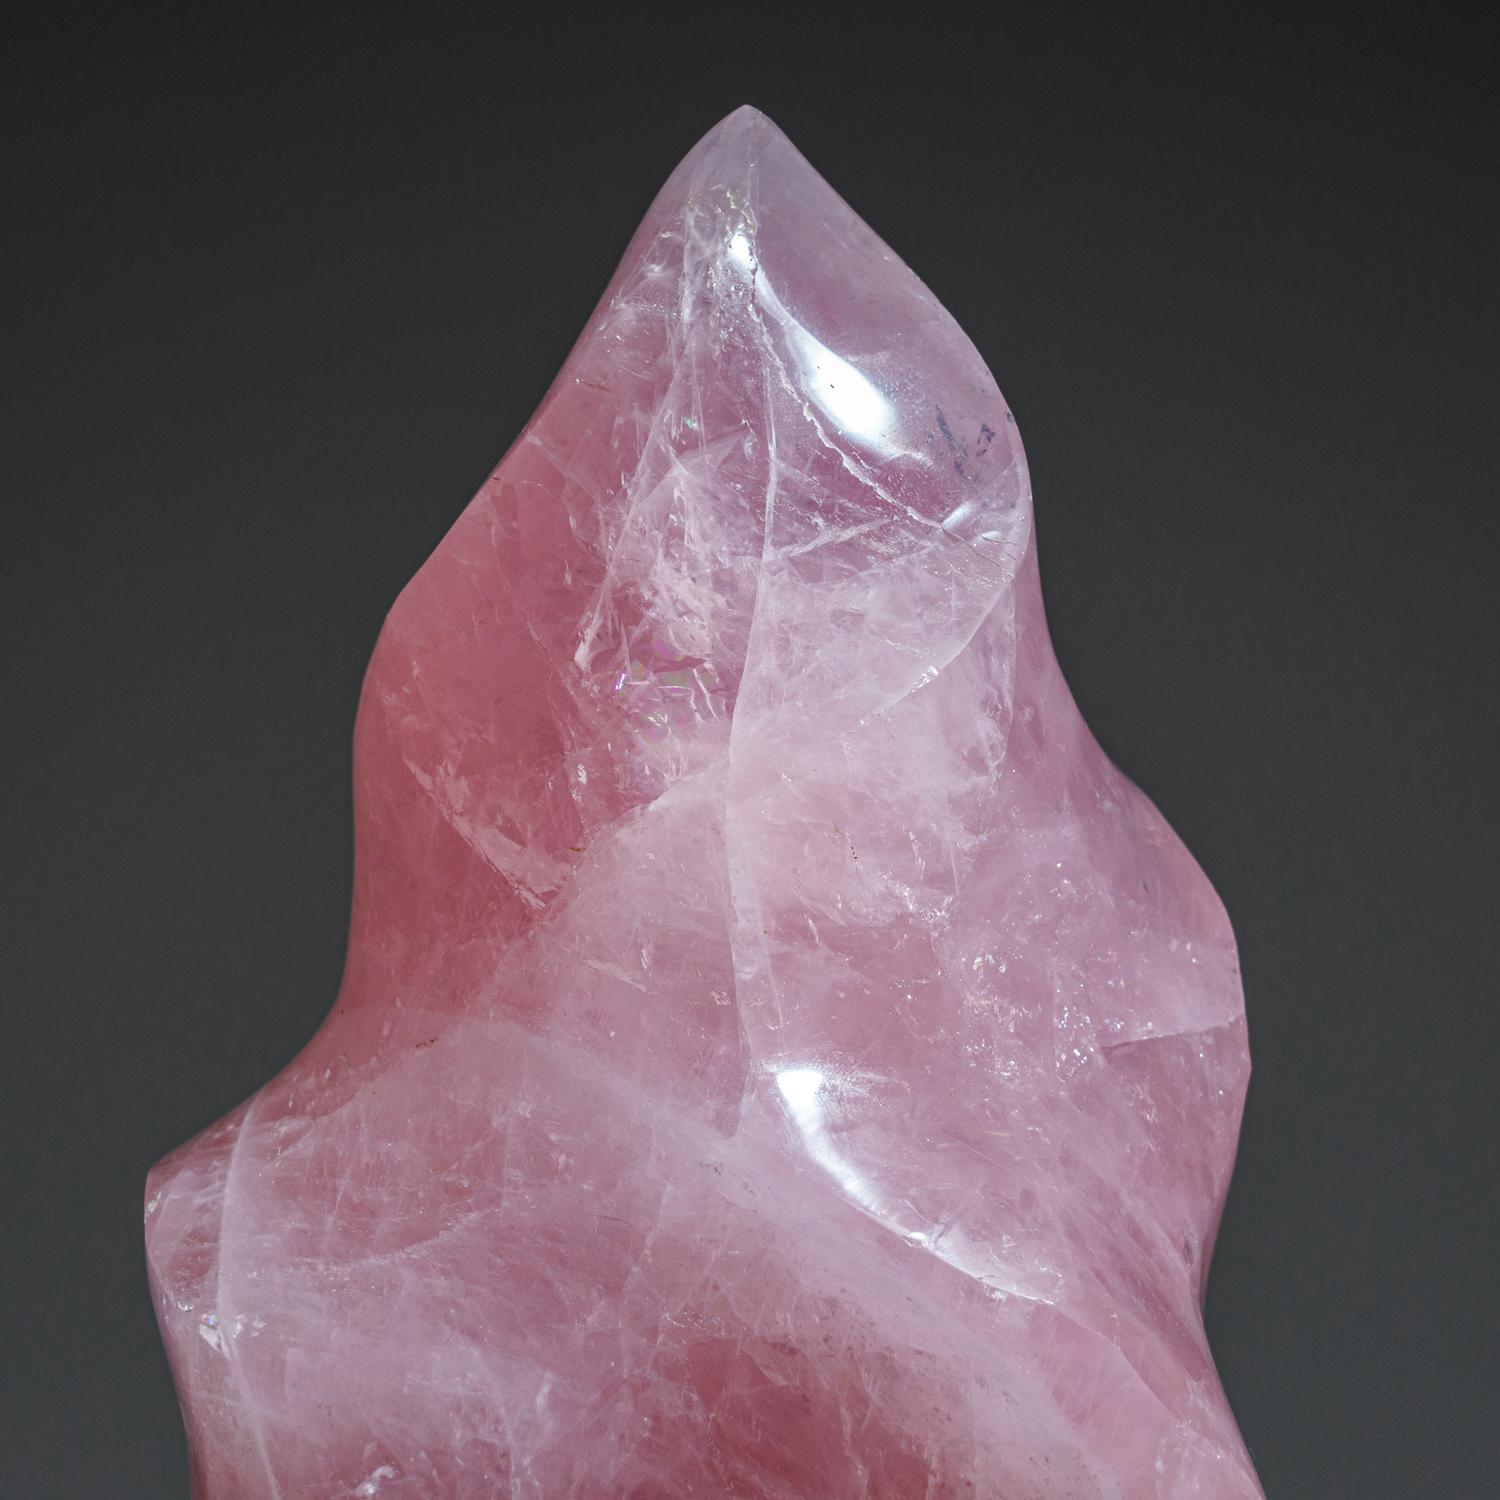 AAA quality, hand-polished flame free-form of natural gem translucent rose quartz from Brazil. This specimen has bright rich color, all sides hand polished to a smooth mirror finish.
Rose Quartz is the stone of unconditional love. One of the most